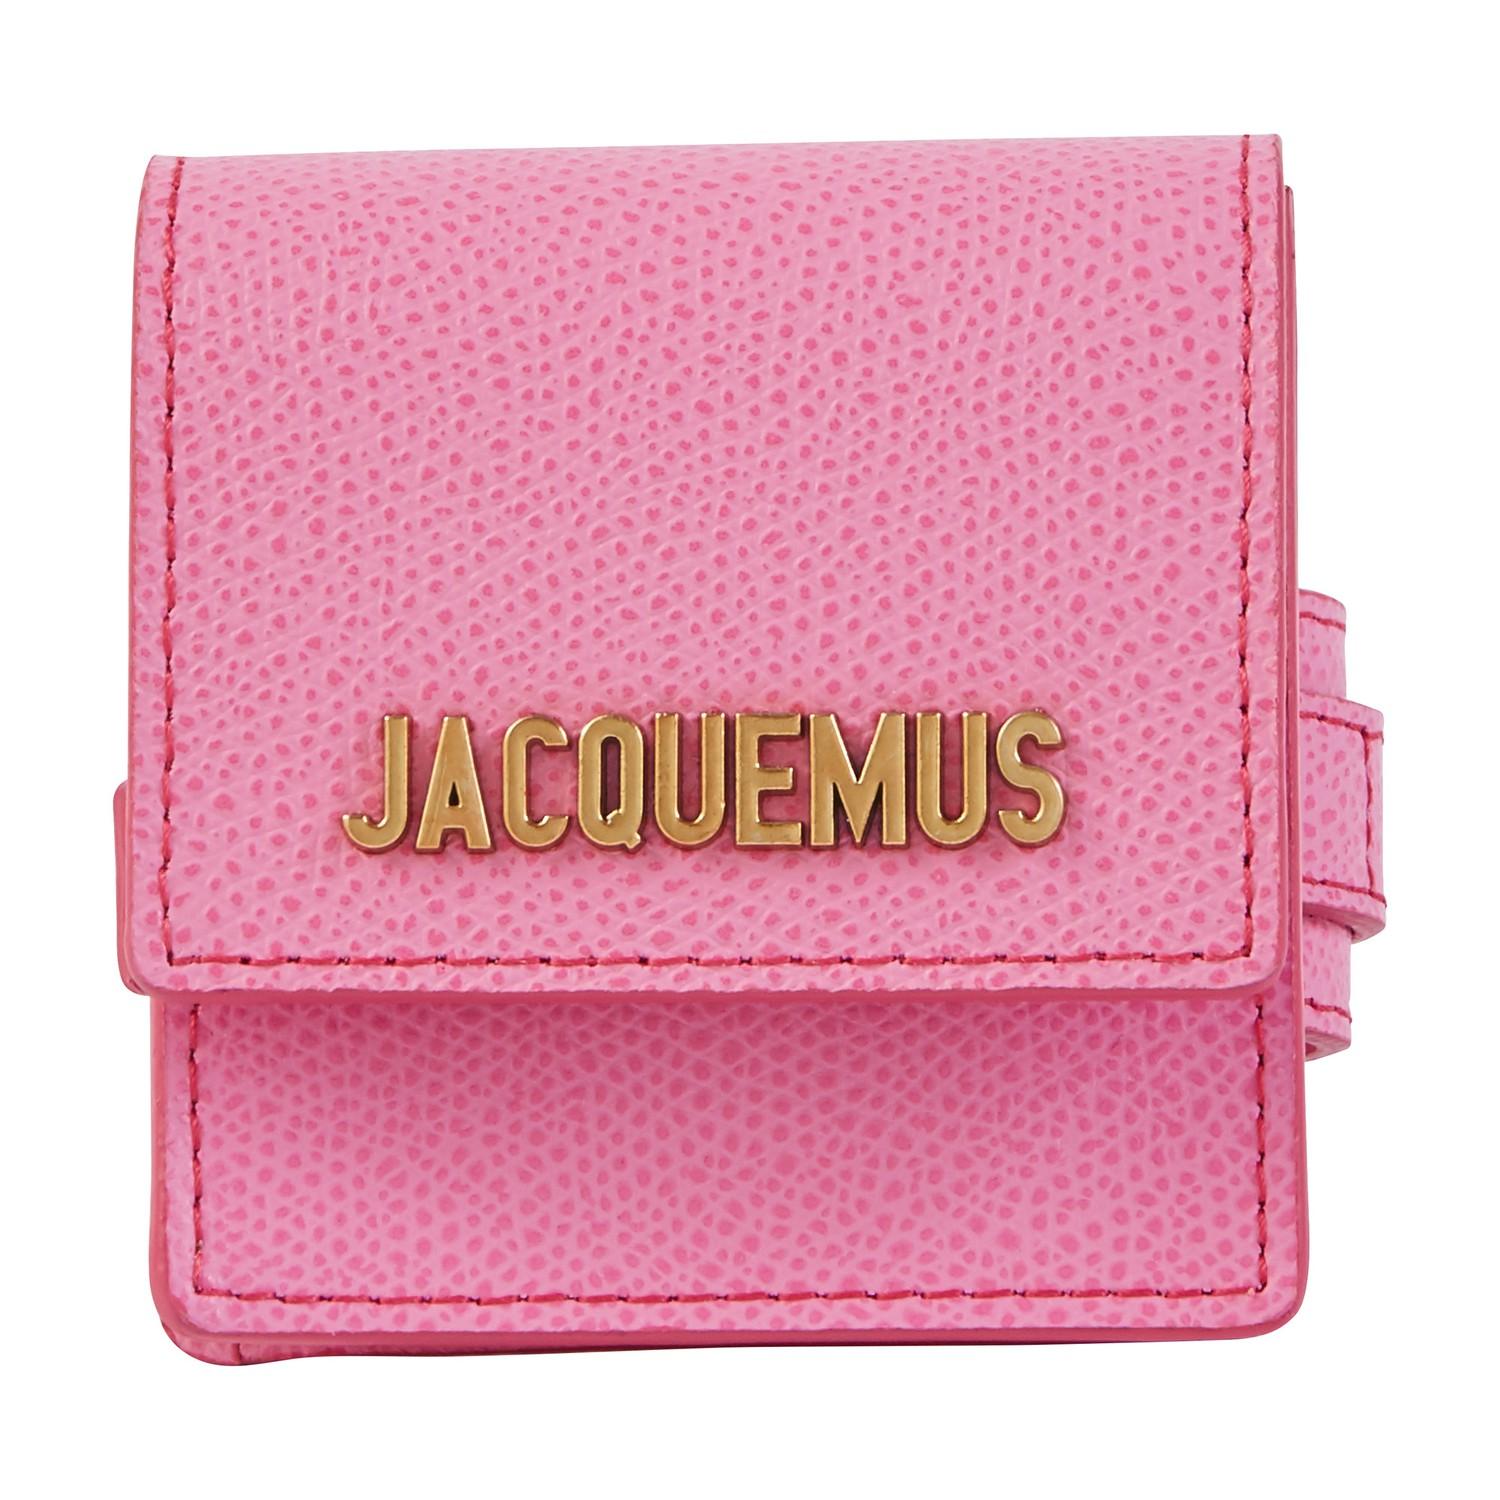 Jacquemus Leather Bracelet Bag in Pink | Lyst